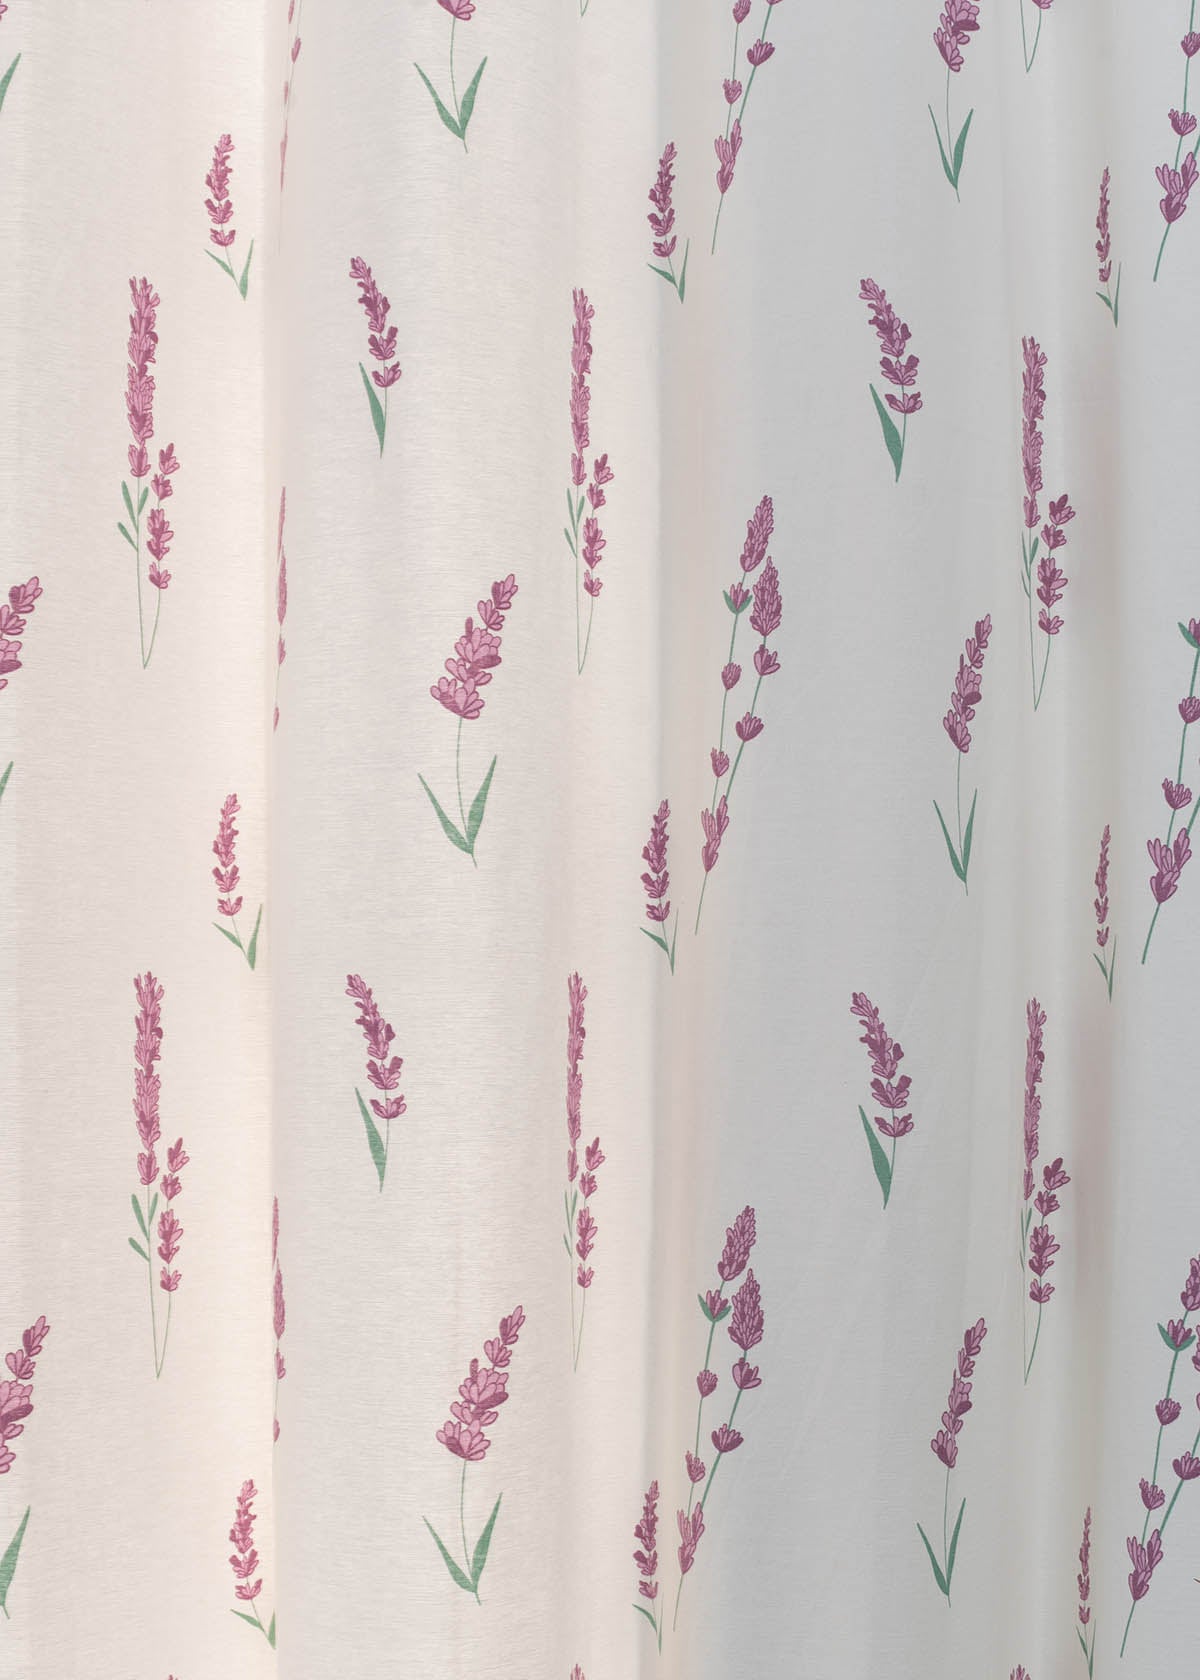 Fields printed cotton Fabric - Lavender